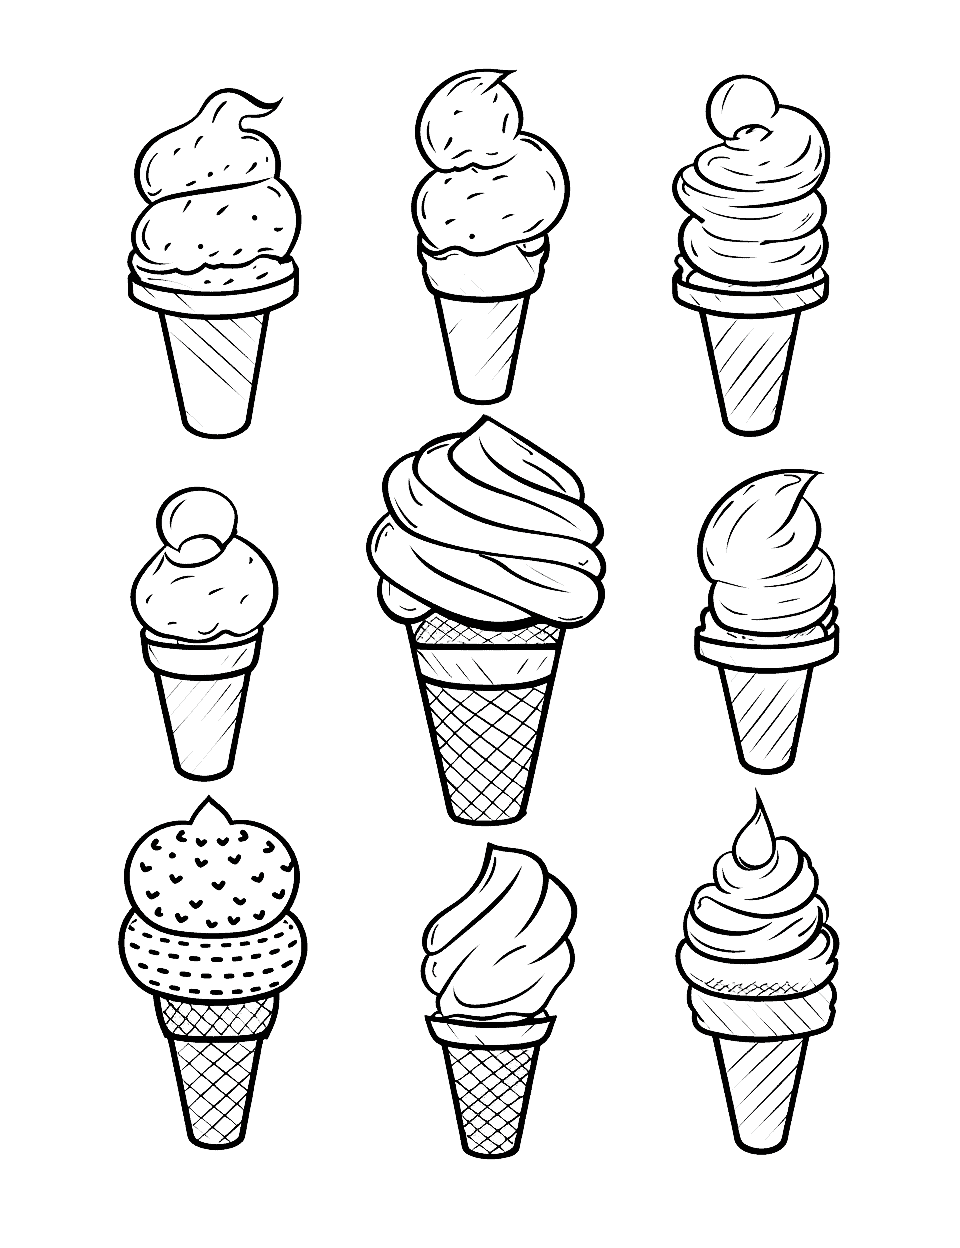 Different Ice Cream Coloring Page - Different ice creams of various flavors and designs.